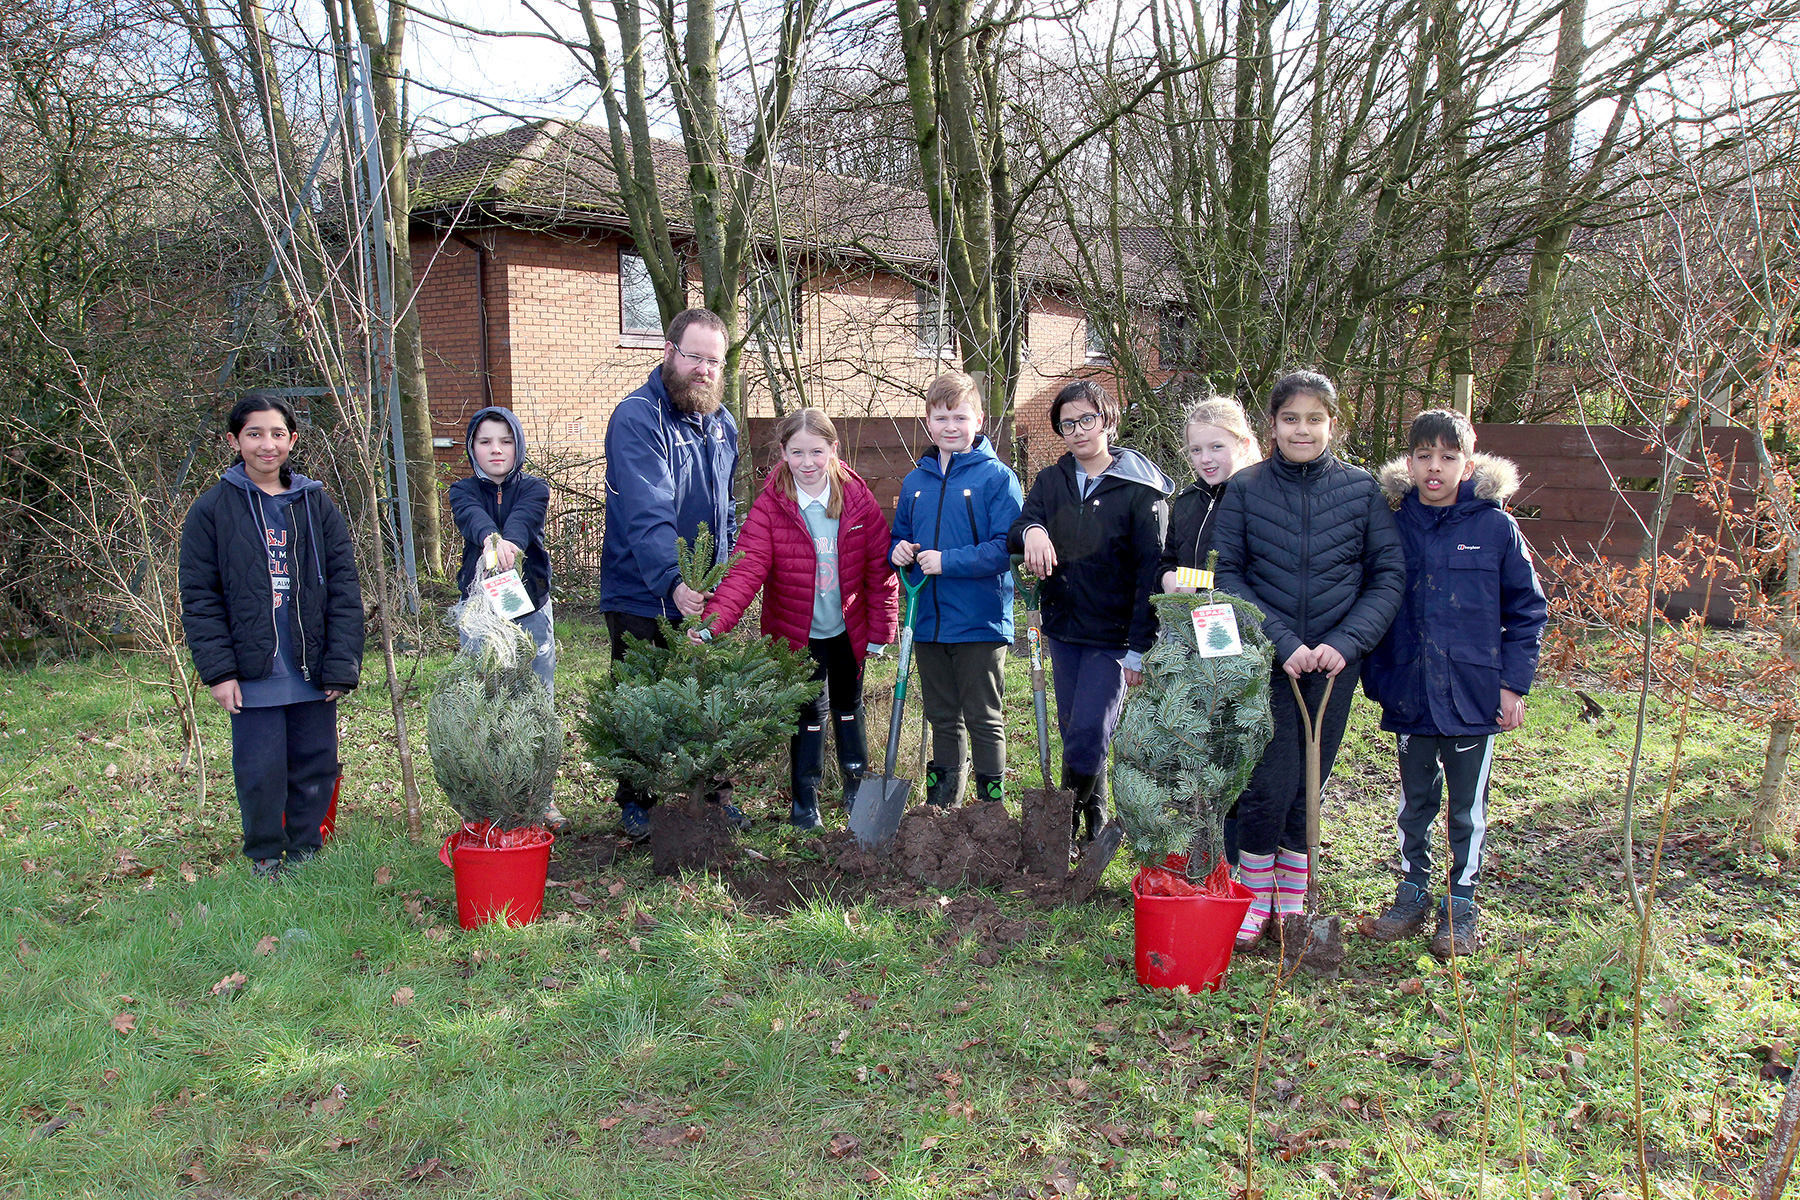 SPAR and James Hall & Co. Ltd help Sherwood Primary School to grow its forest